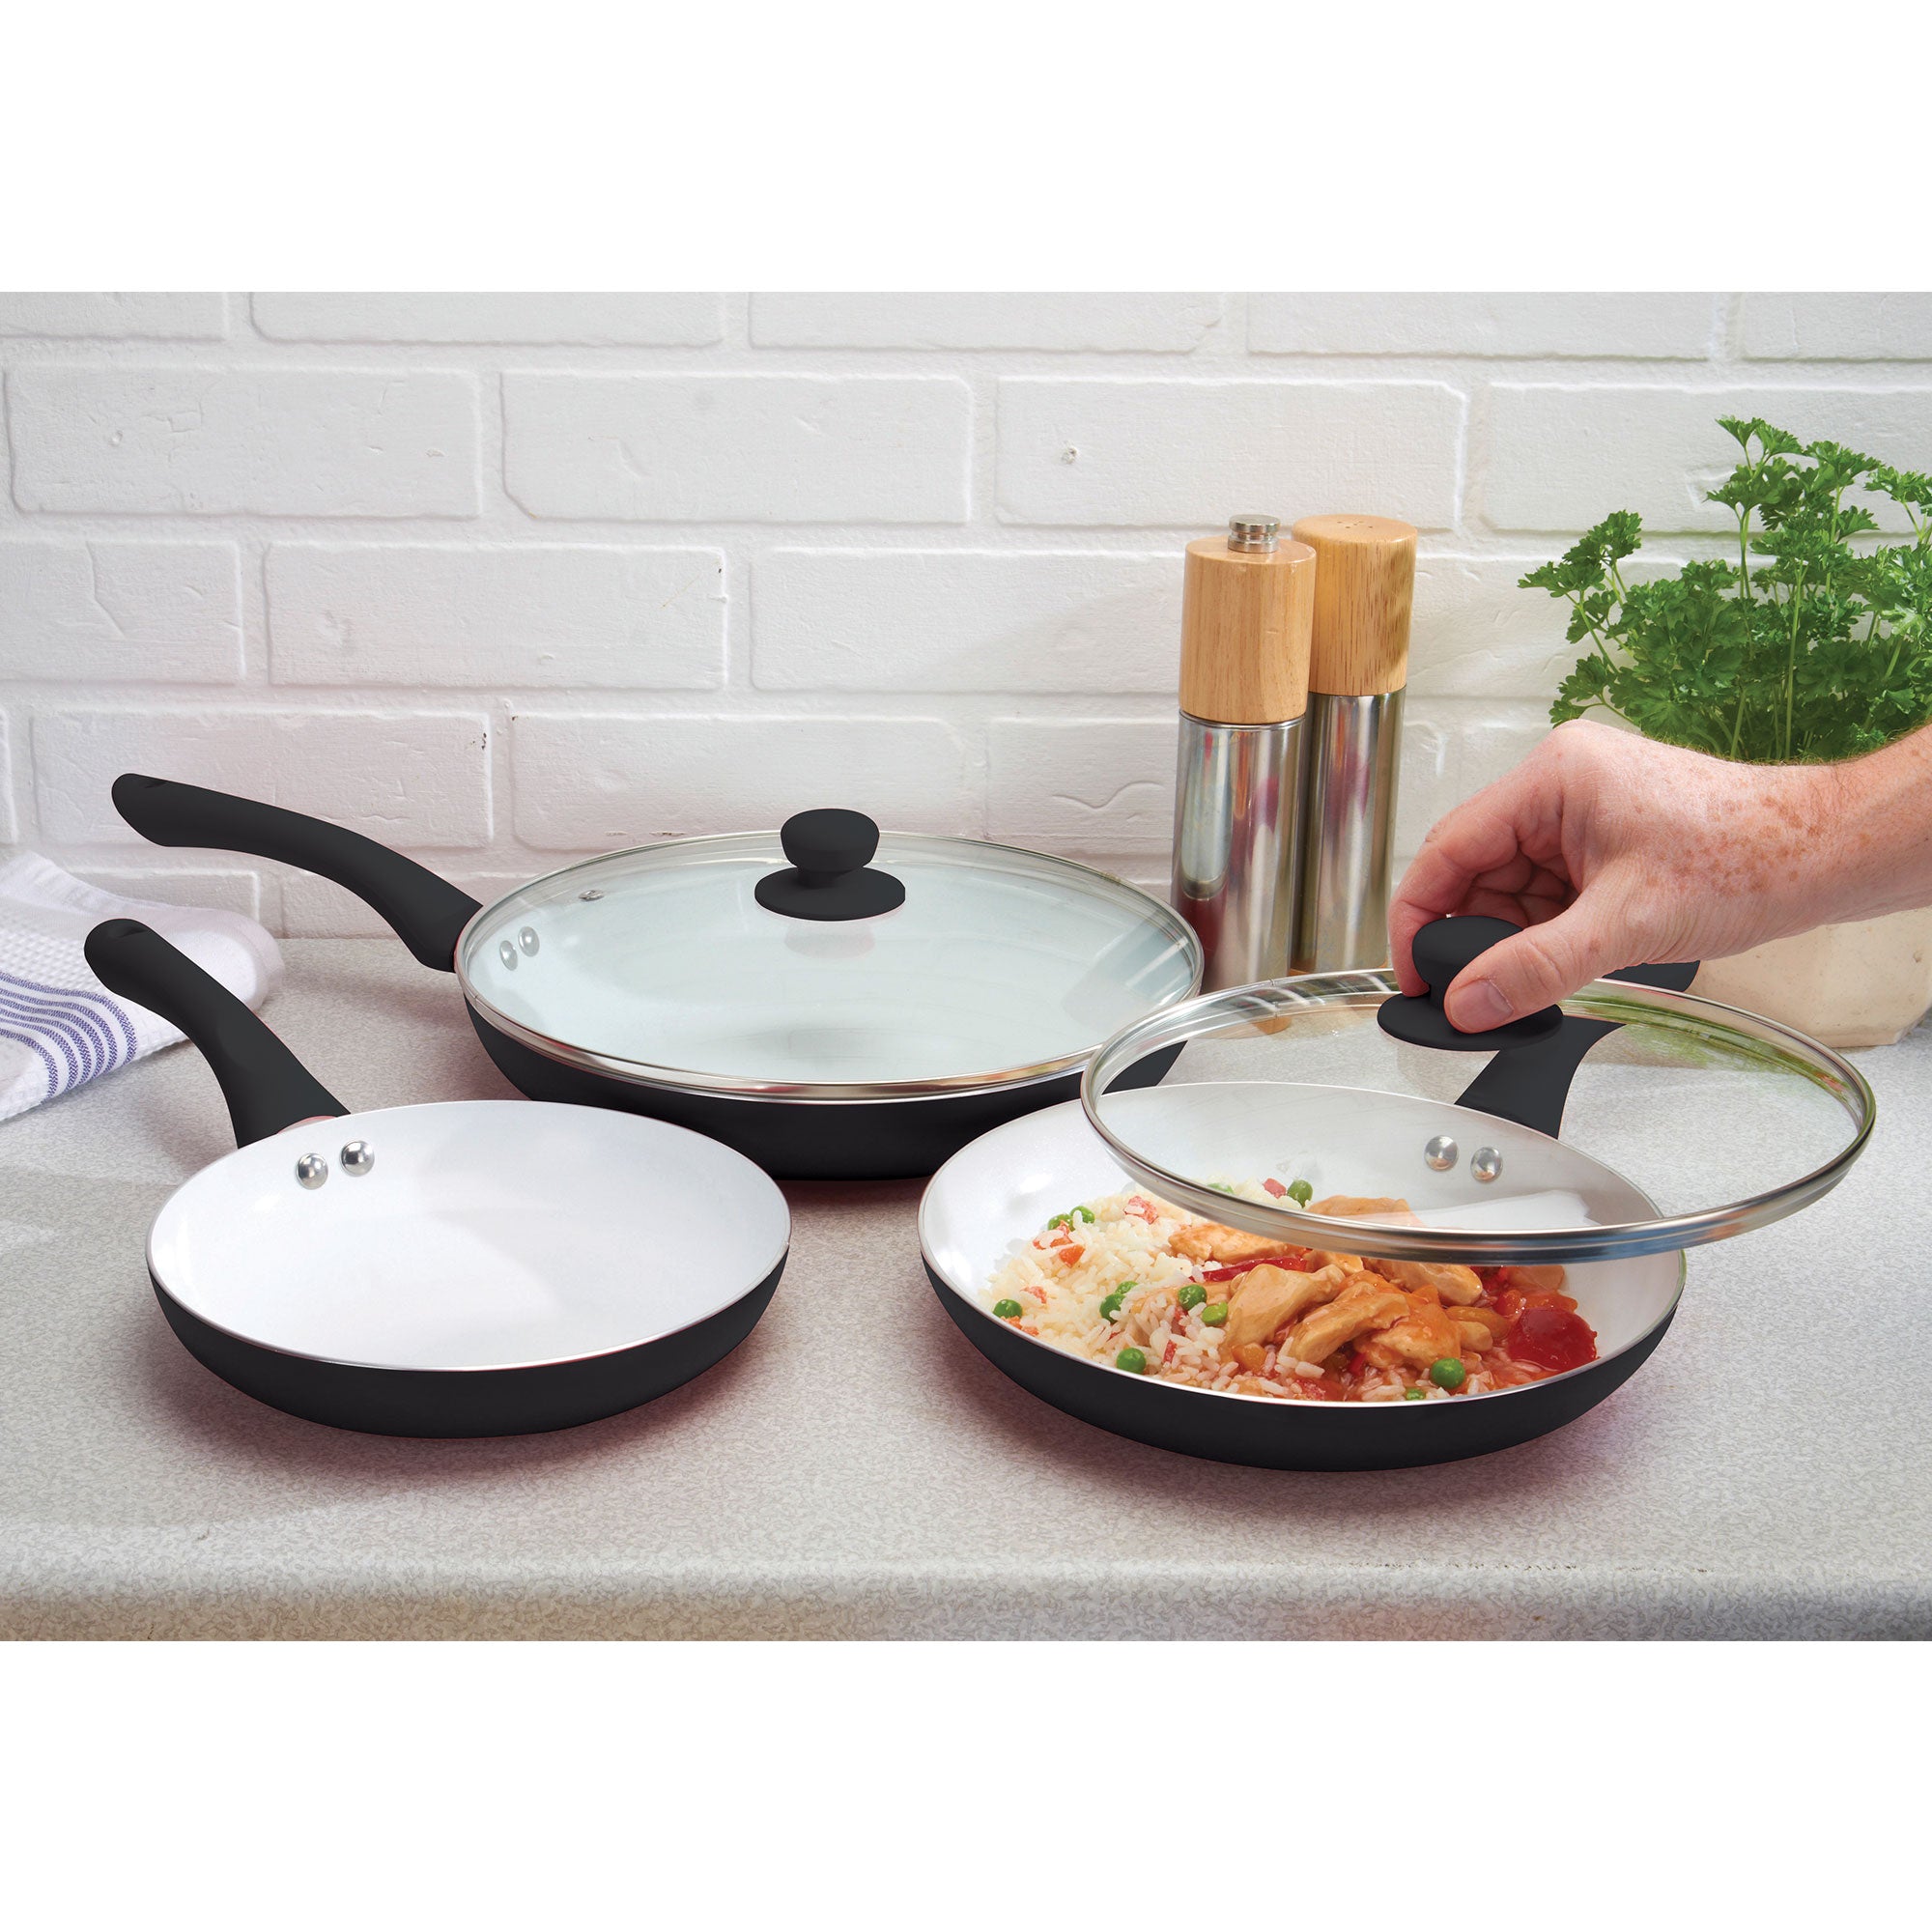 Silicone Handles for The Whatever Pan – Jean Patrique Professional Cookware